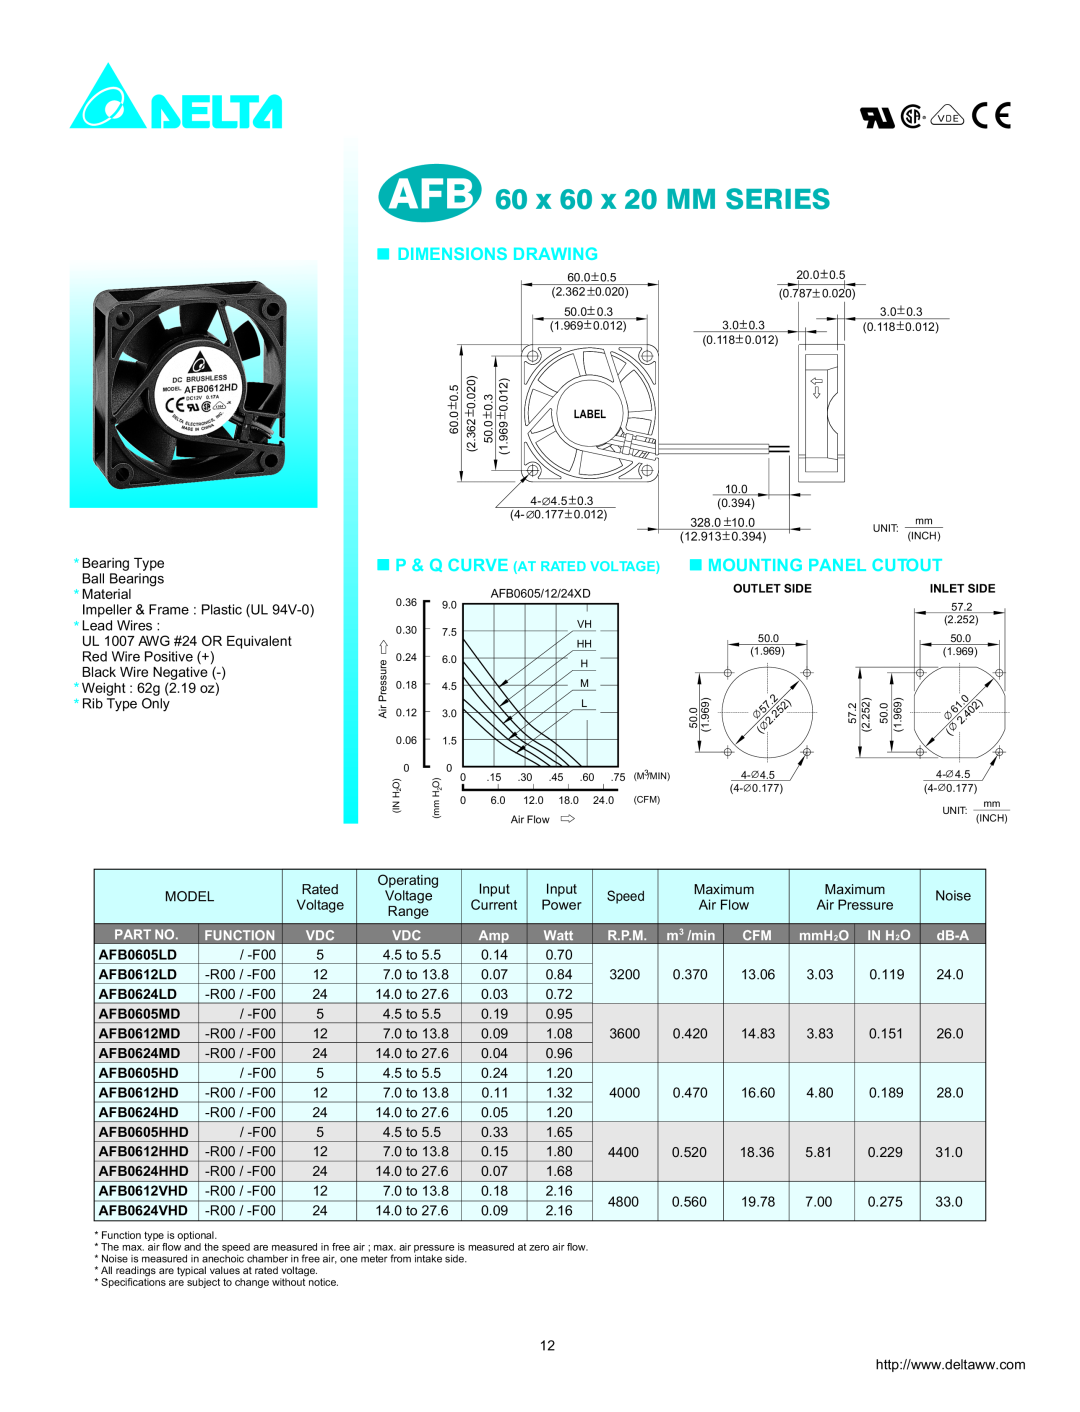 Delta Electronics AFB0612MD dimensions AFB 60 x 60 x 20 MM SERIES, Dimensions Drawing, Mounting Panel Cutout, Function 